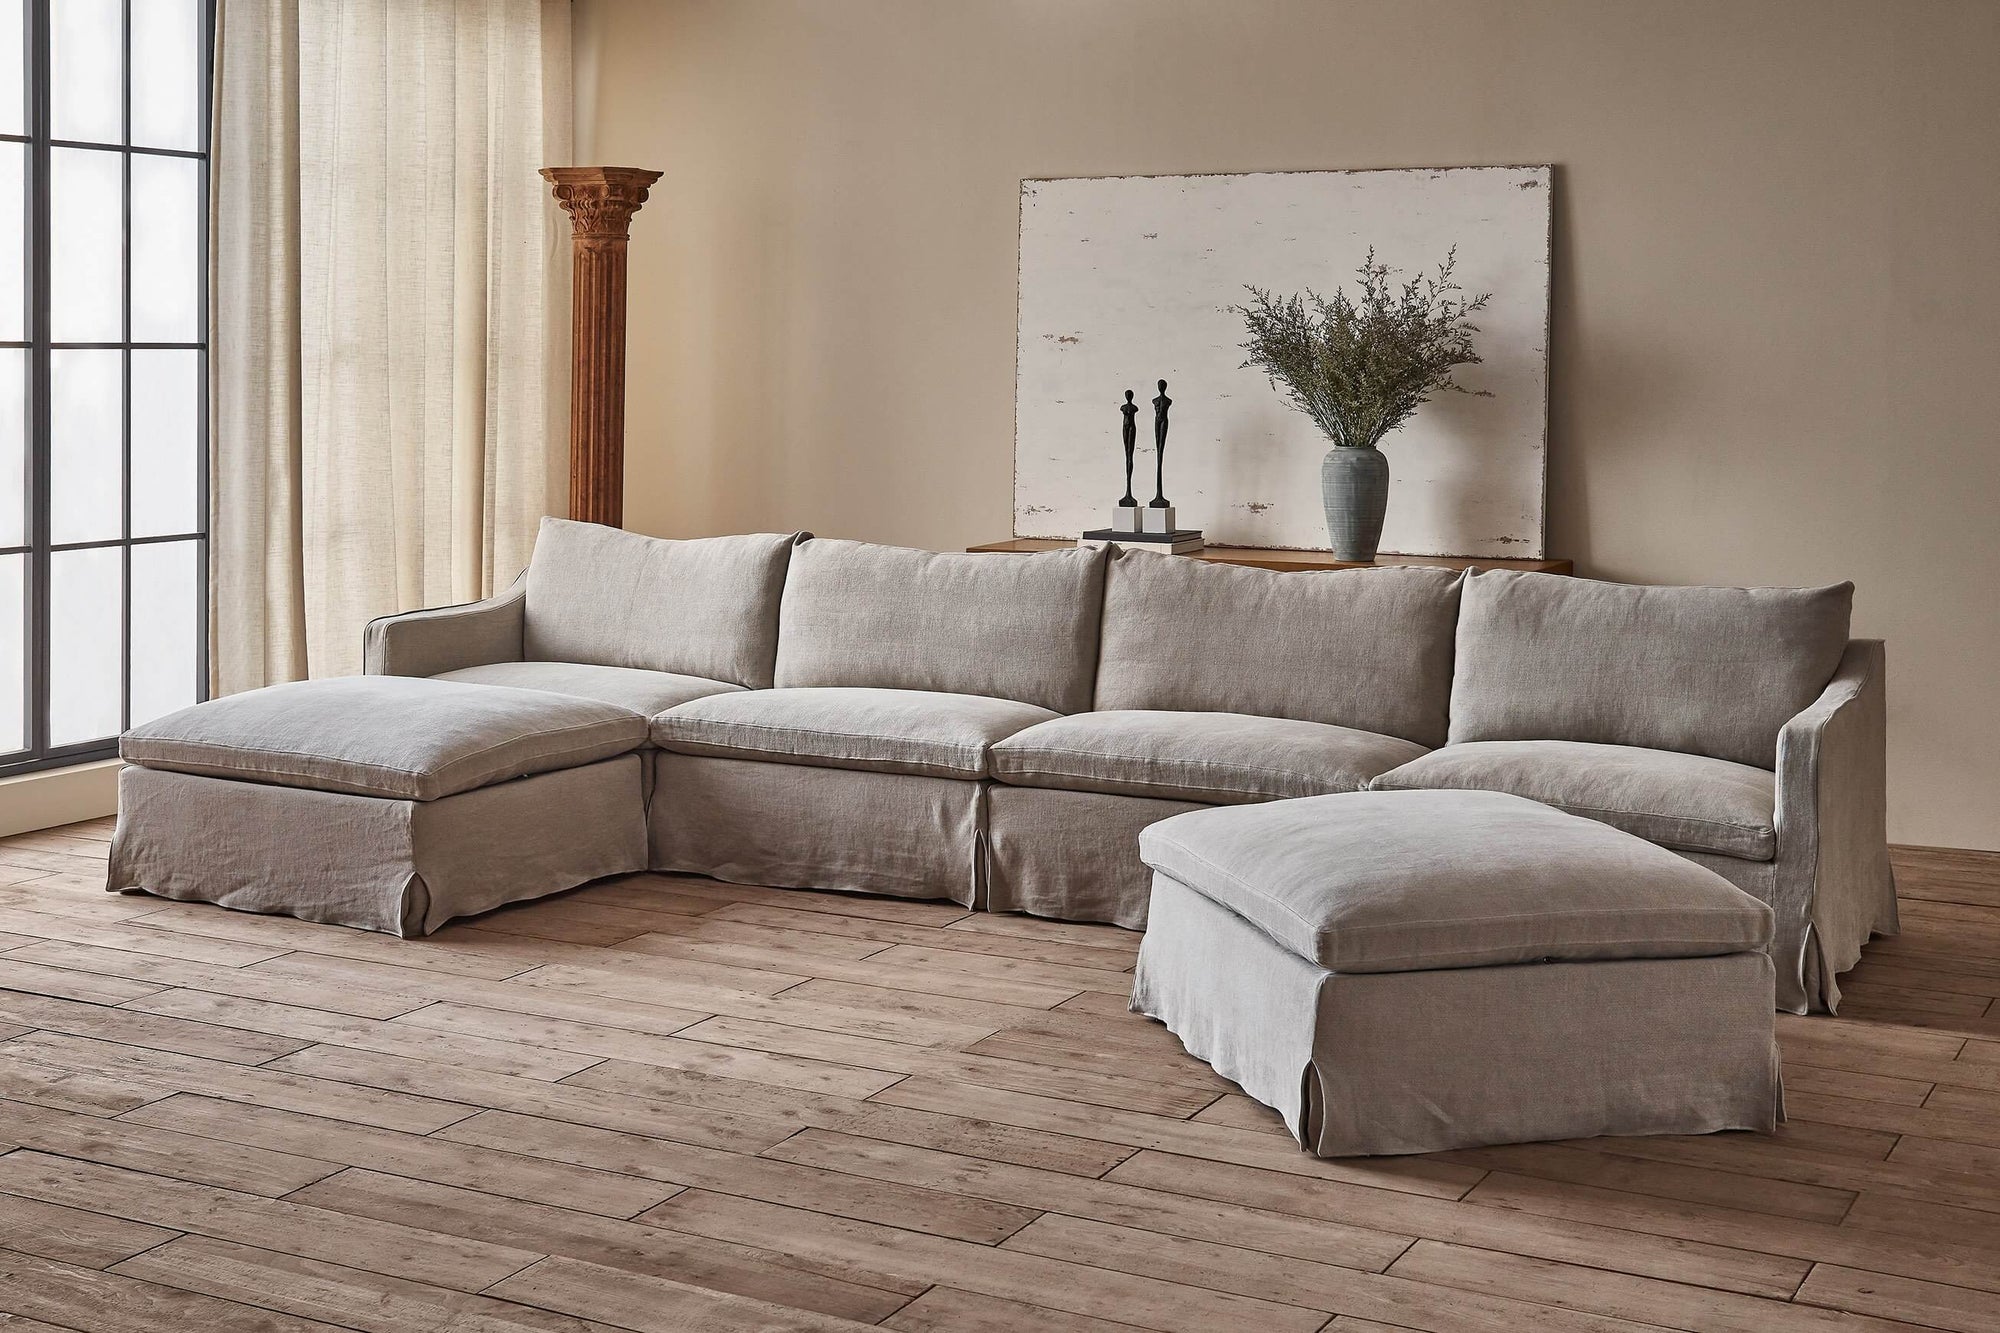 Amelia U-Shape Sectional Sofa in Jasmine Rice, a light warm greige Medium Weight Linen, placed in a bright room with a wooden pillar and a console table decorated with two small statues, wildflowers in a vase, and a white wooden painting.